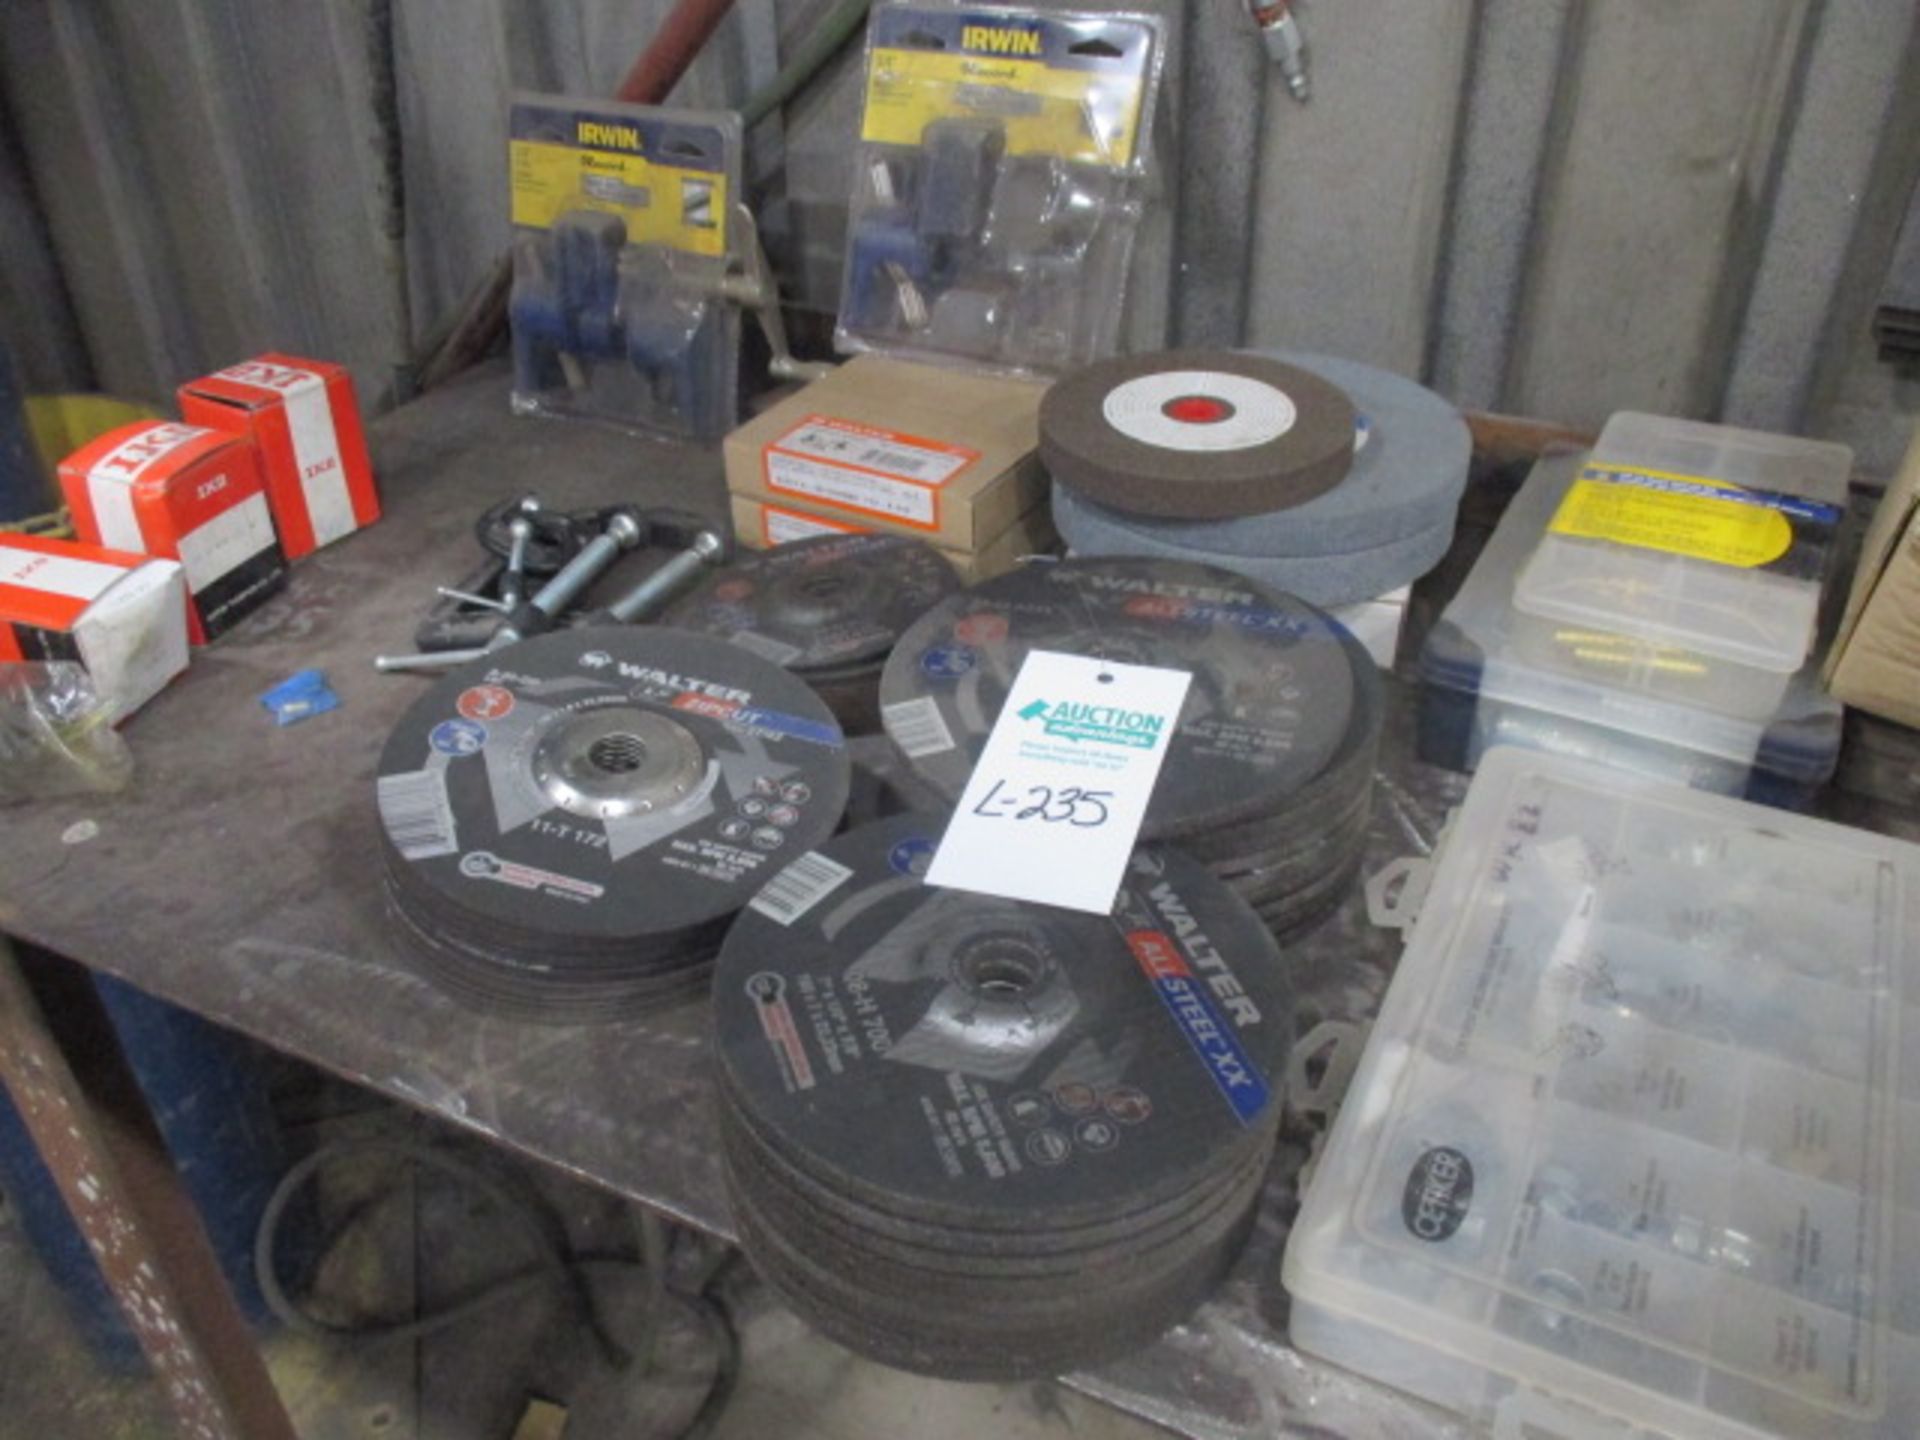 Metal Table and Contents, Grinding Discs, Repair Kits, Electrodes, Etc - Image 4 of 4